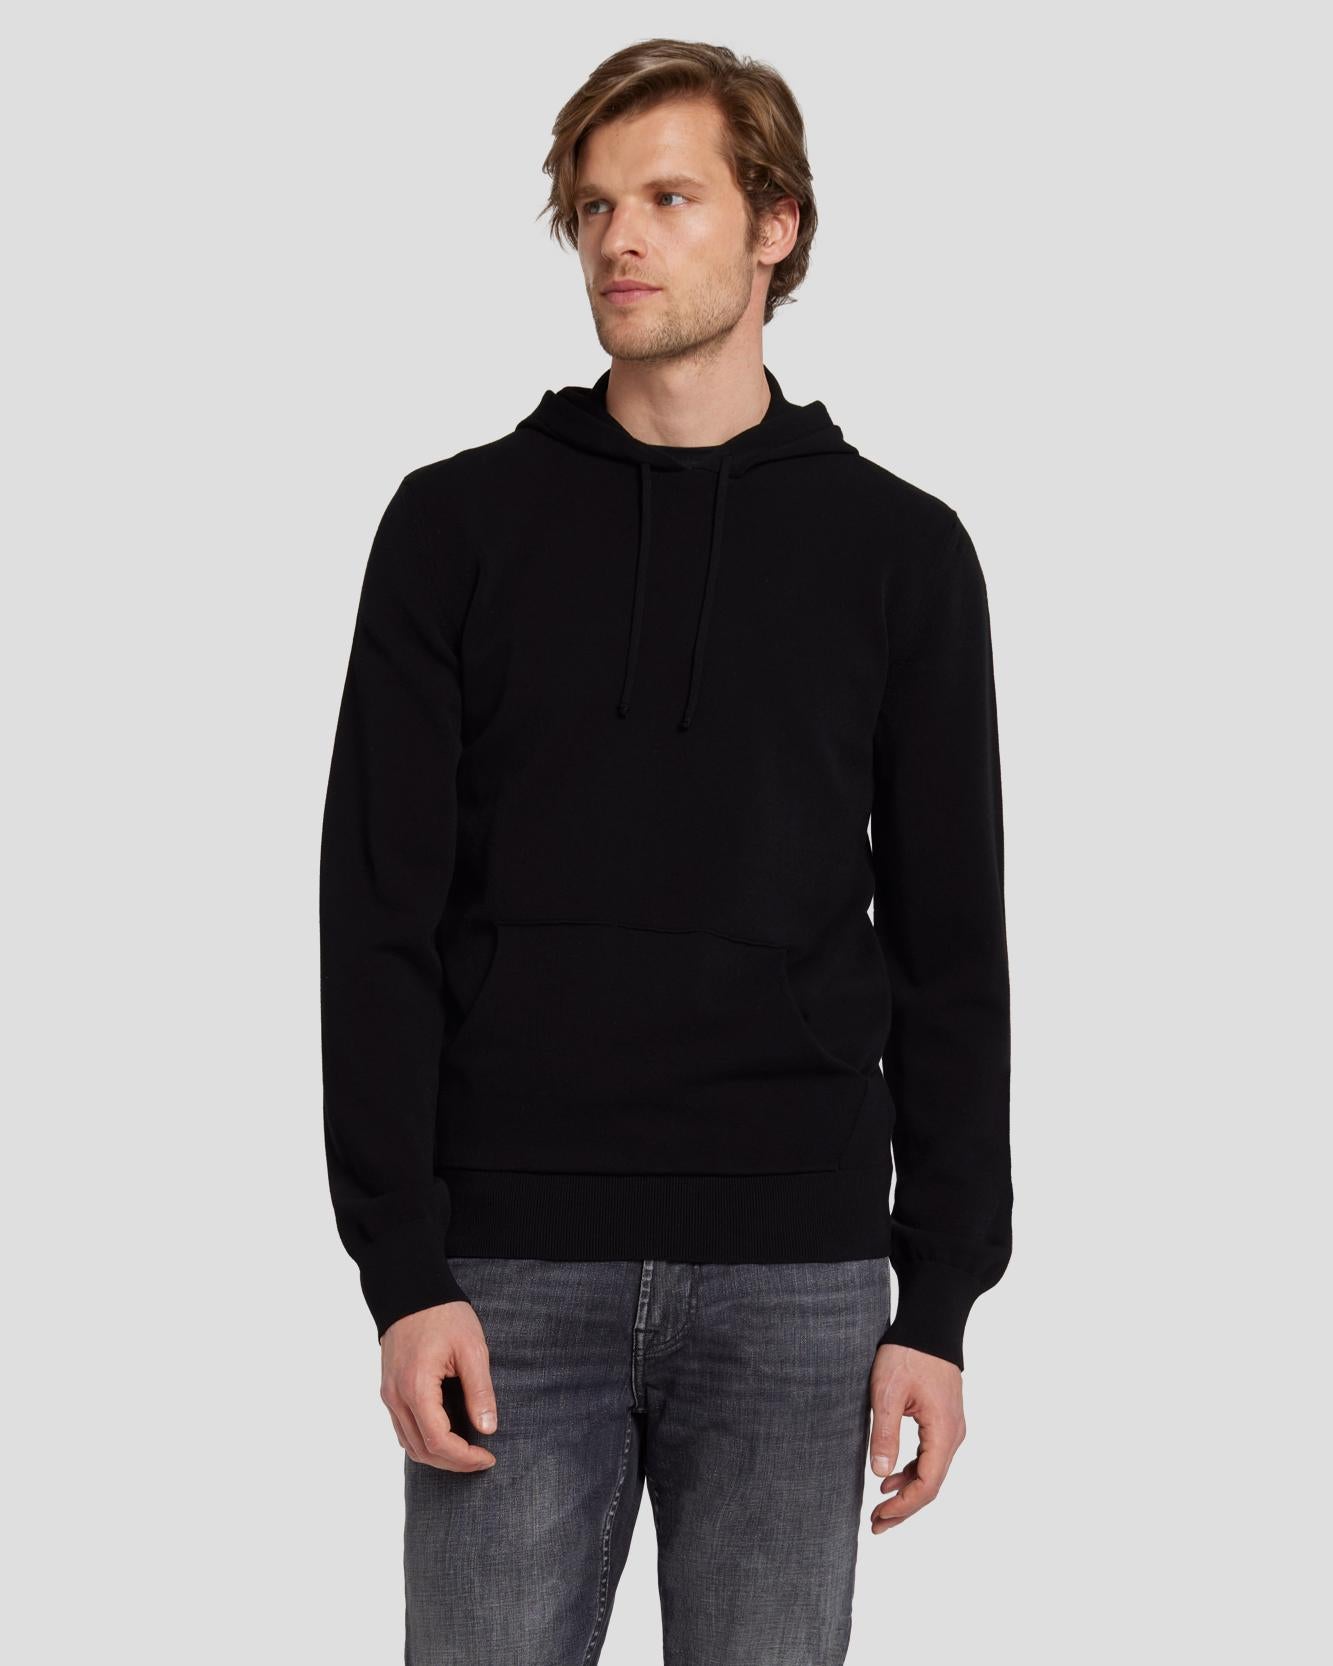 Dynamic Luxe Hoodie in Black | 7 For All Mankind